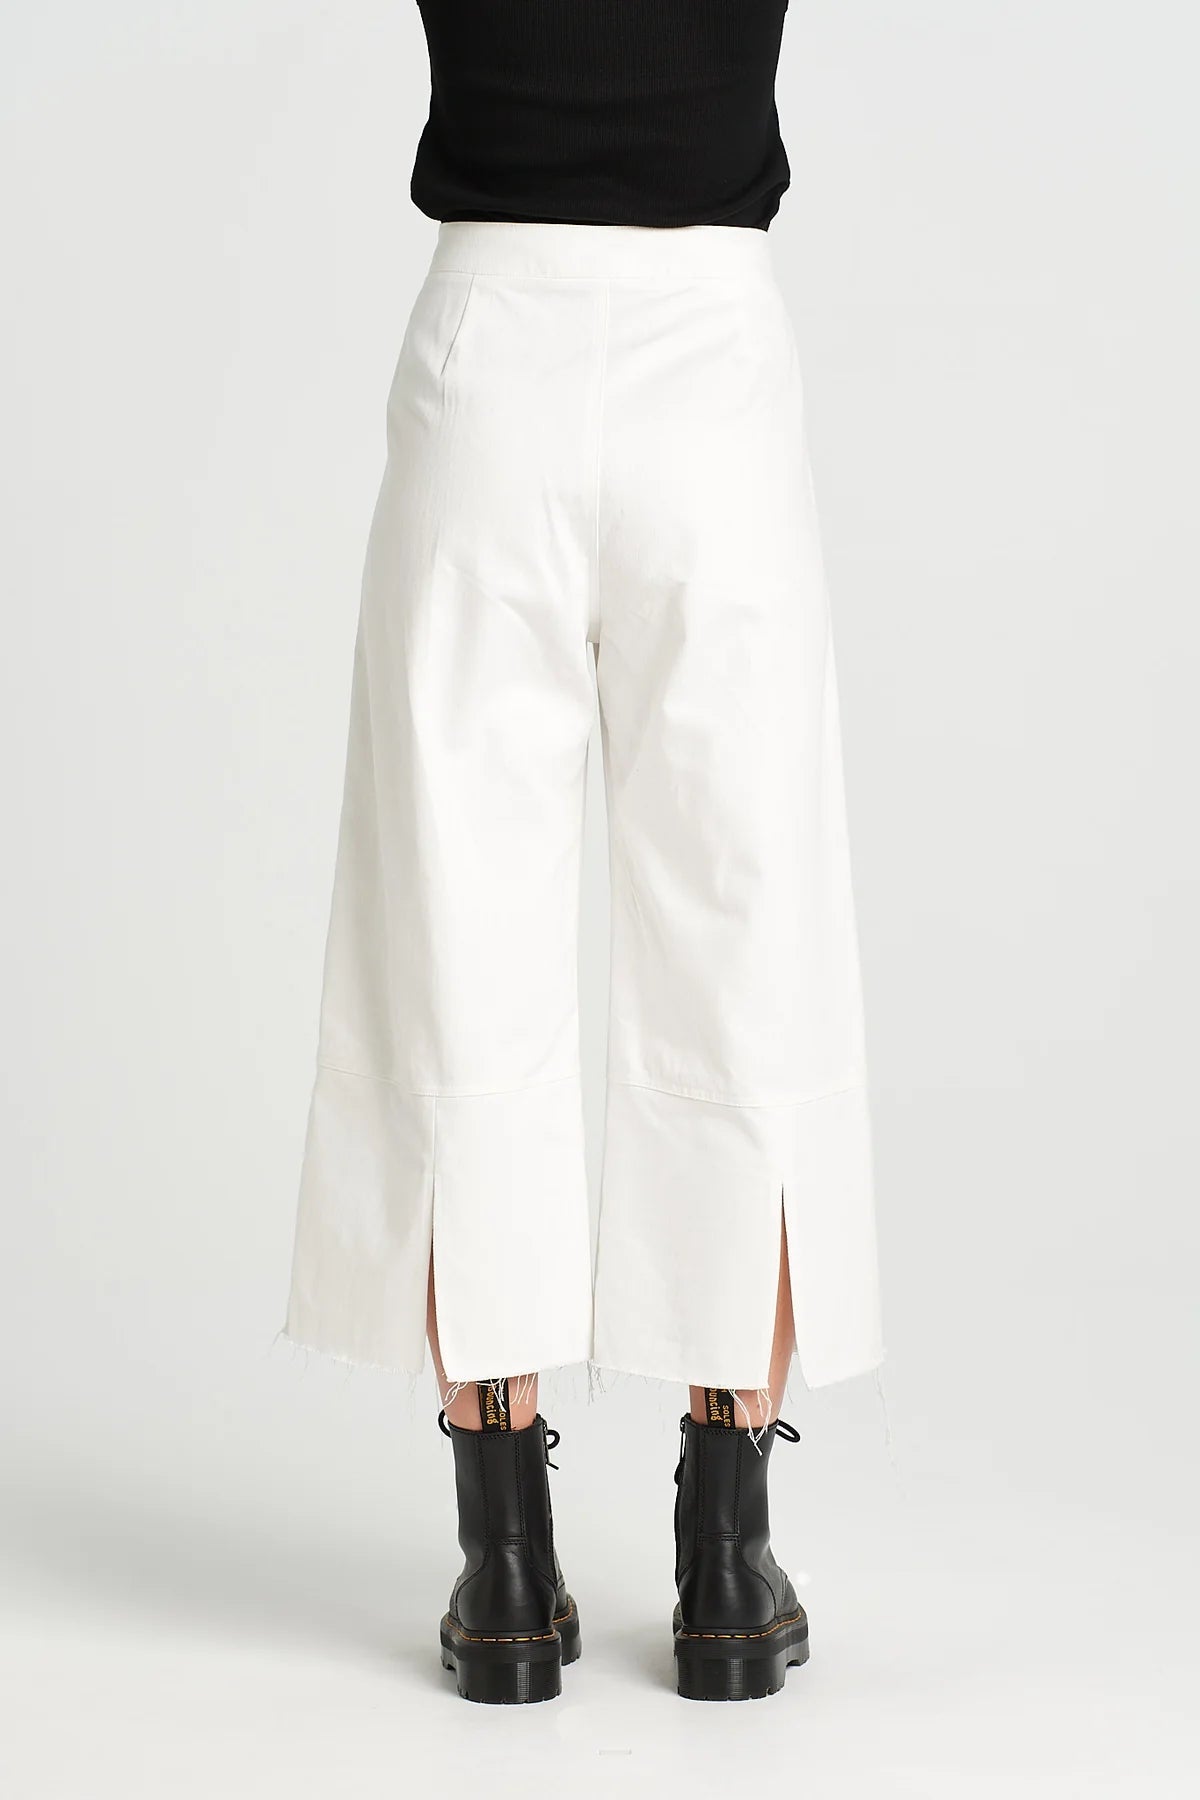 Nyne | Allied Pant | White | Palm Boutique